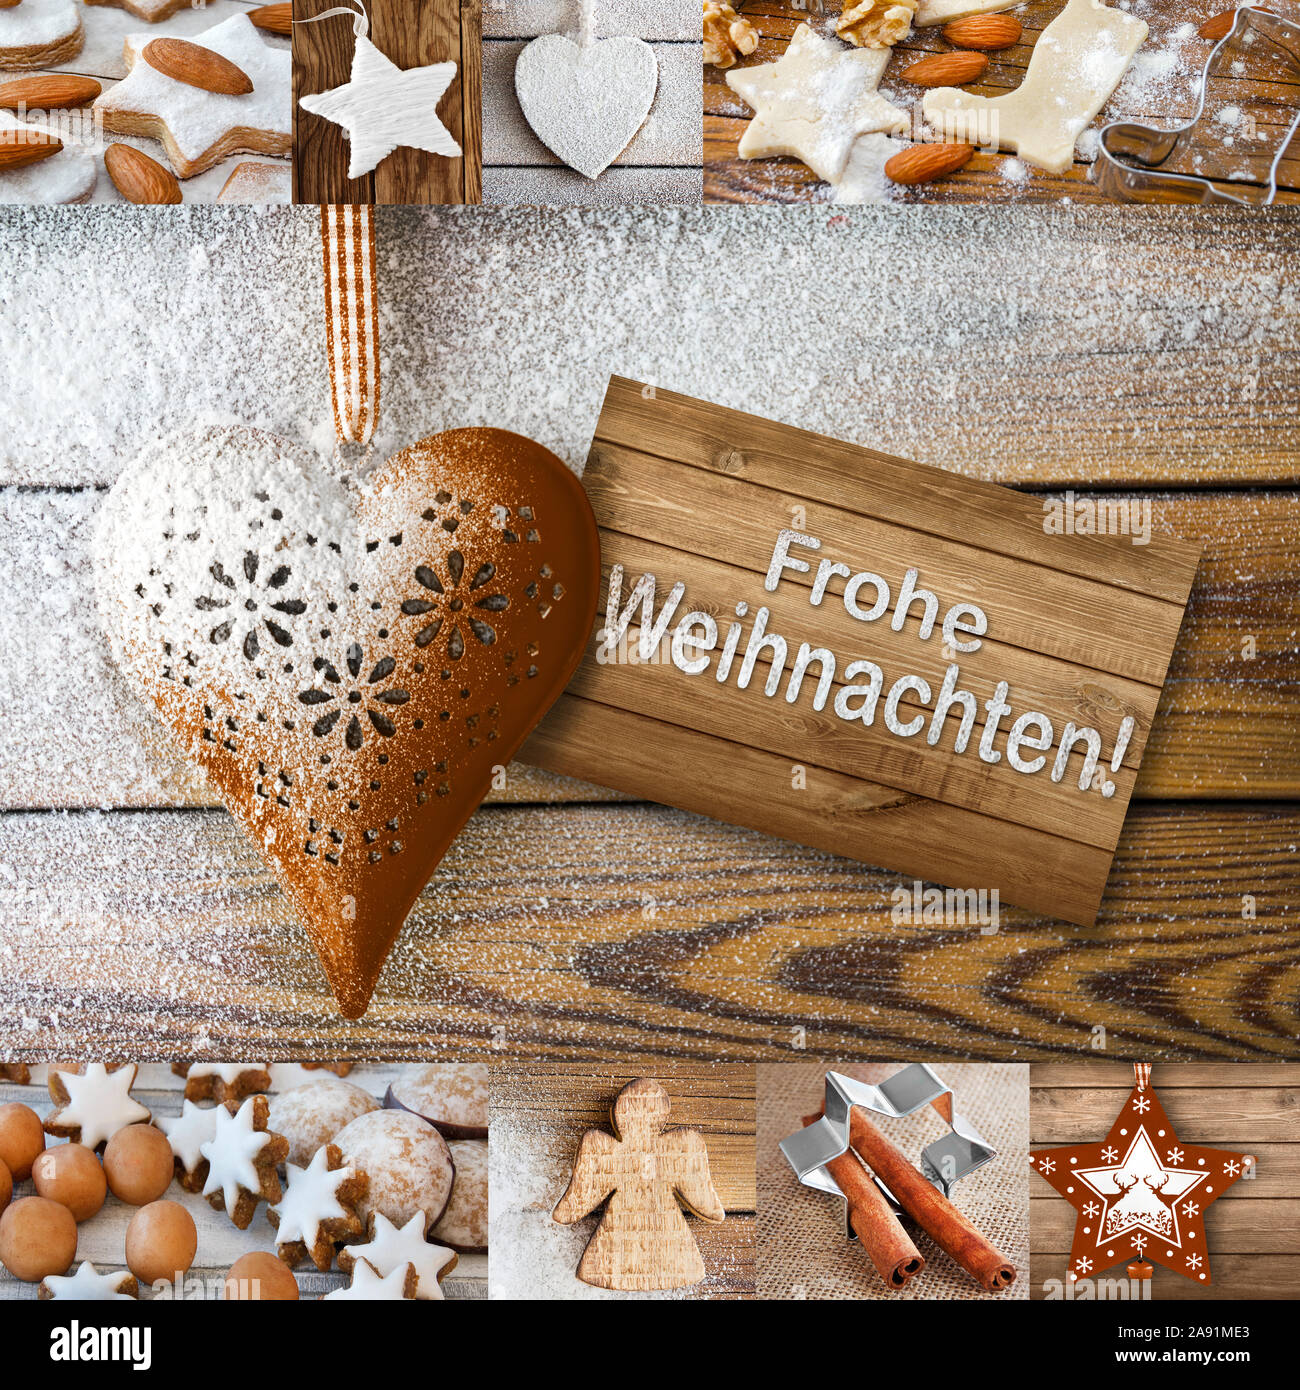 Frohe Weihnachten and decorations collage Stock Photo